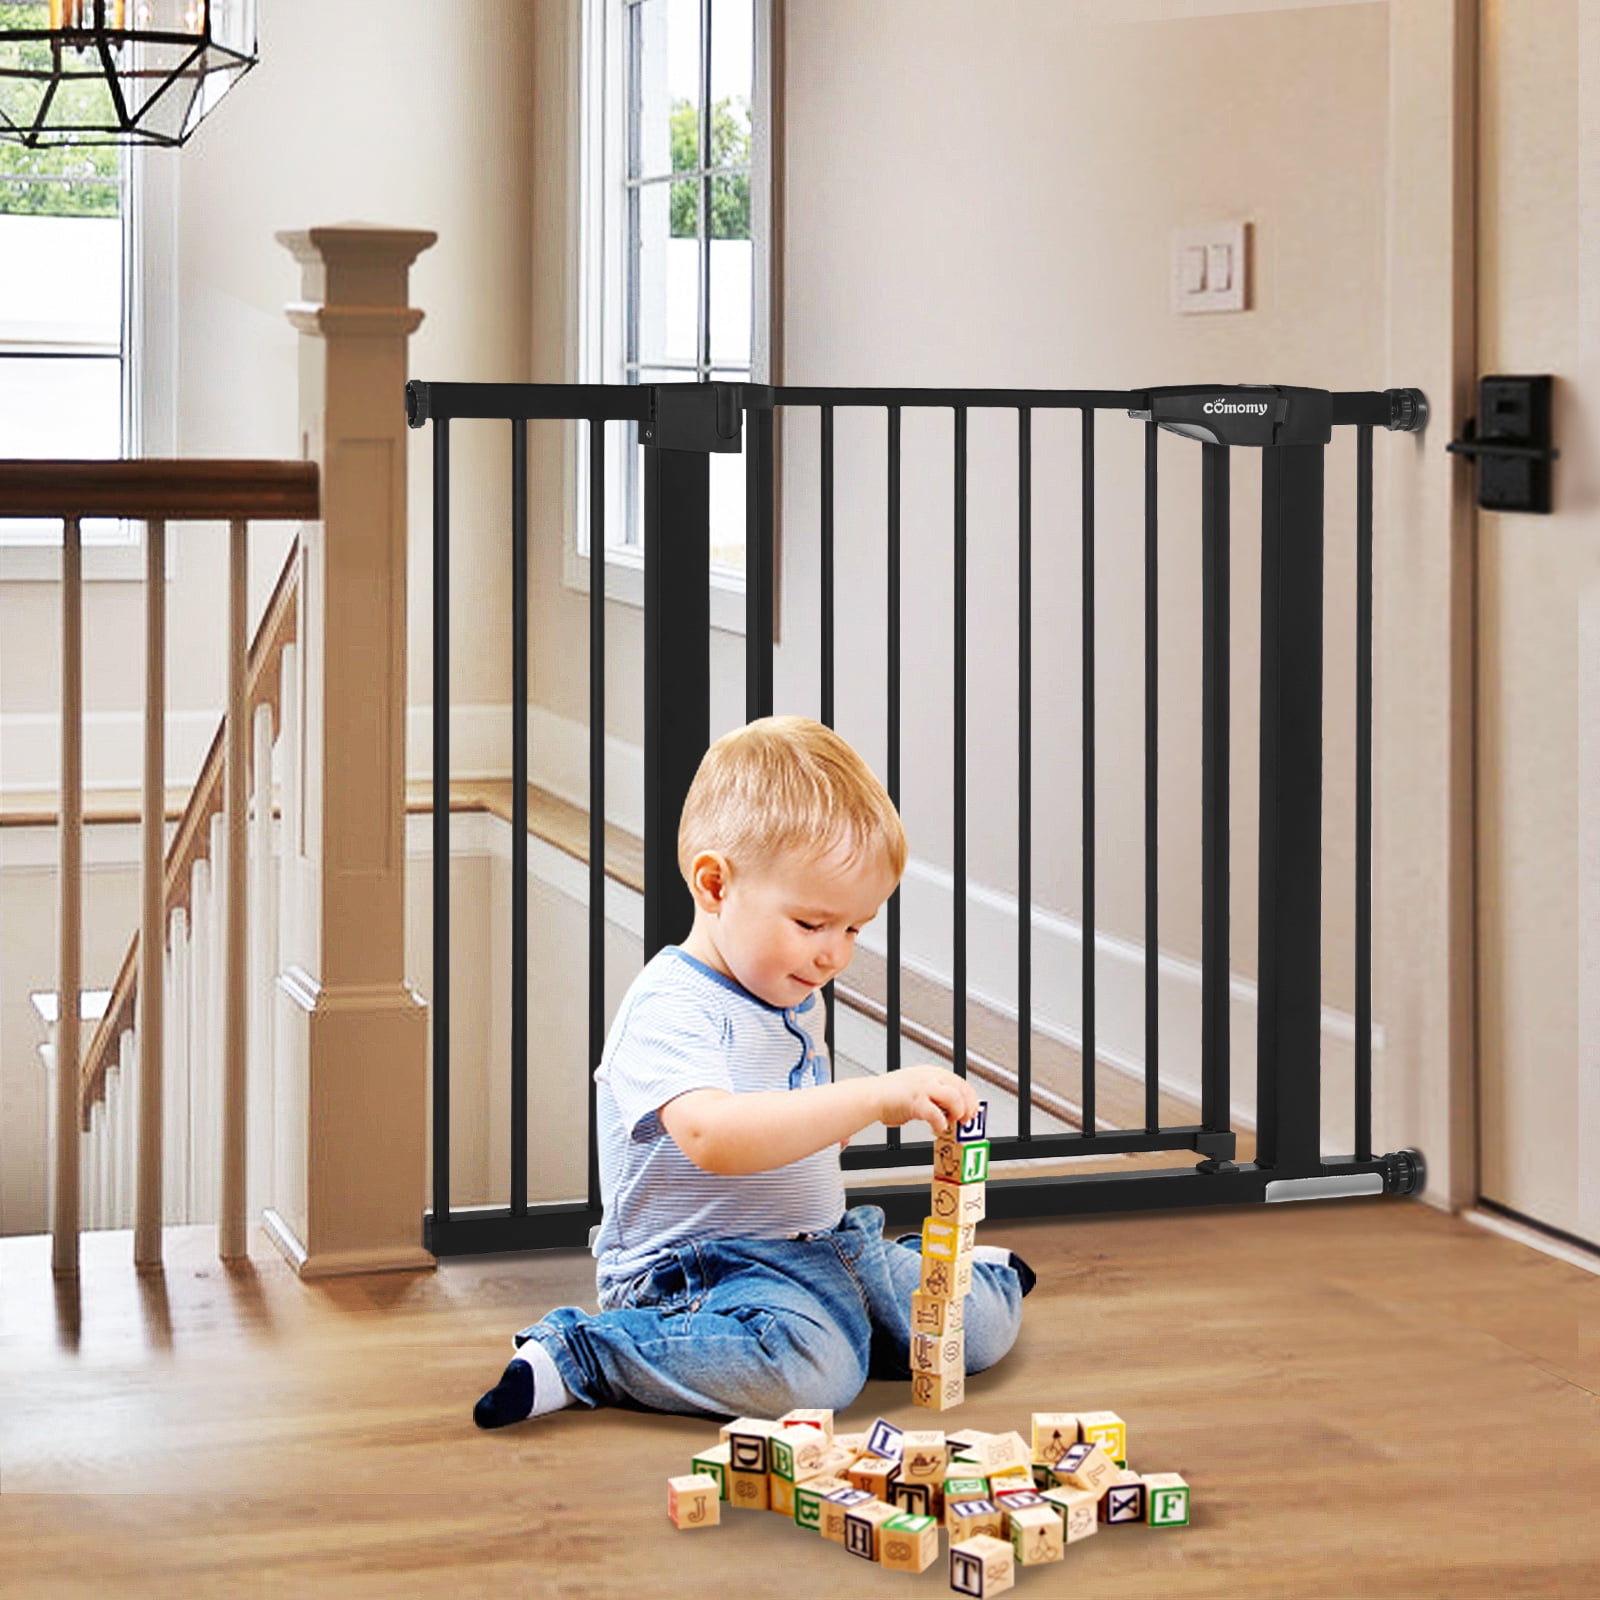 Baby Gate Child Safety Fence Kit Stairs Doorway Gates Extra Large Play Yard Pen 